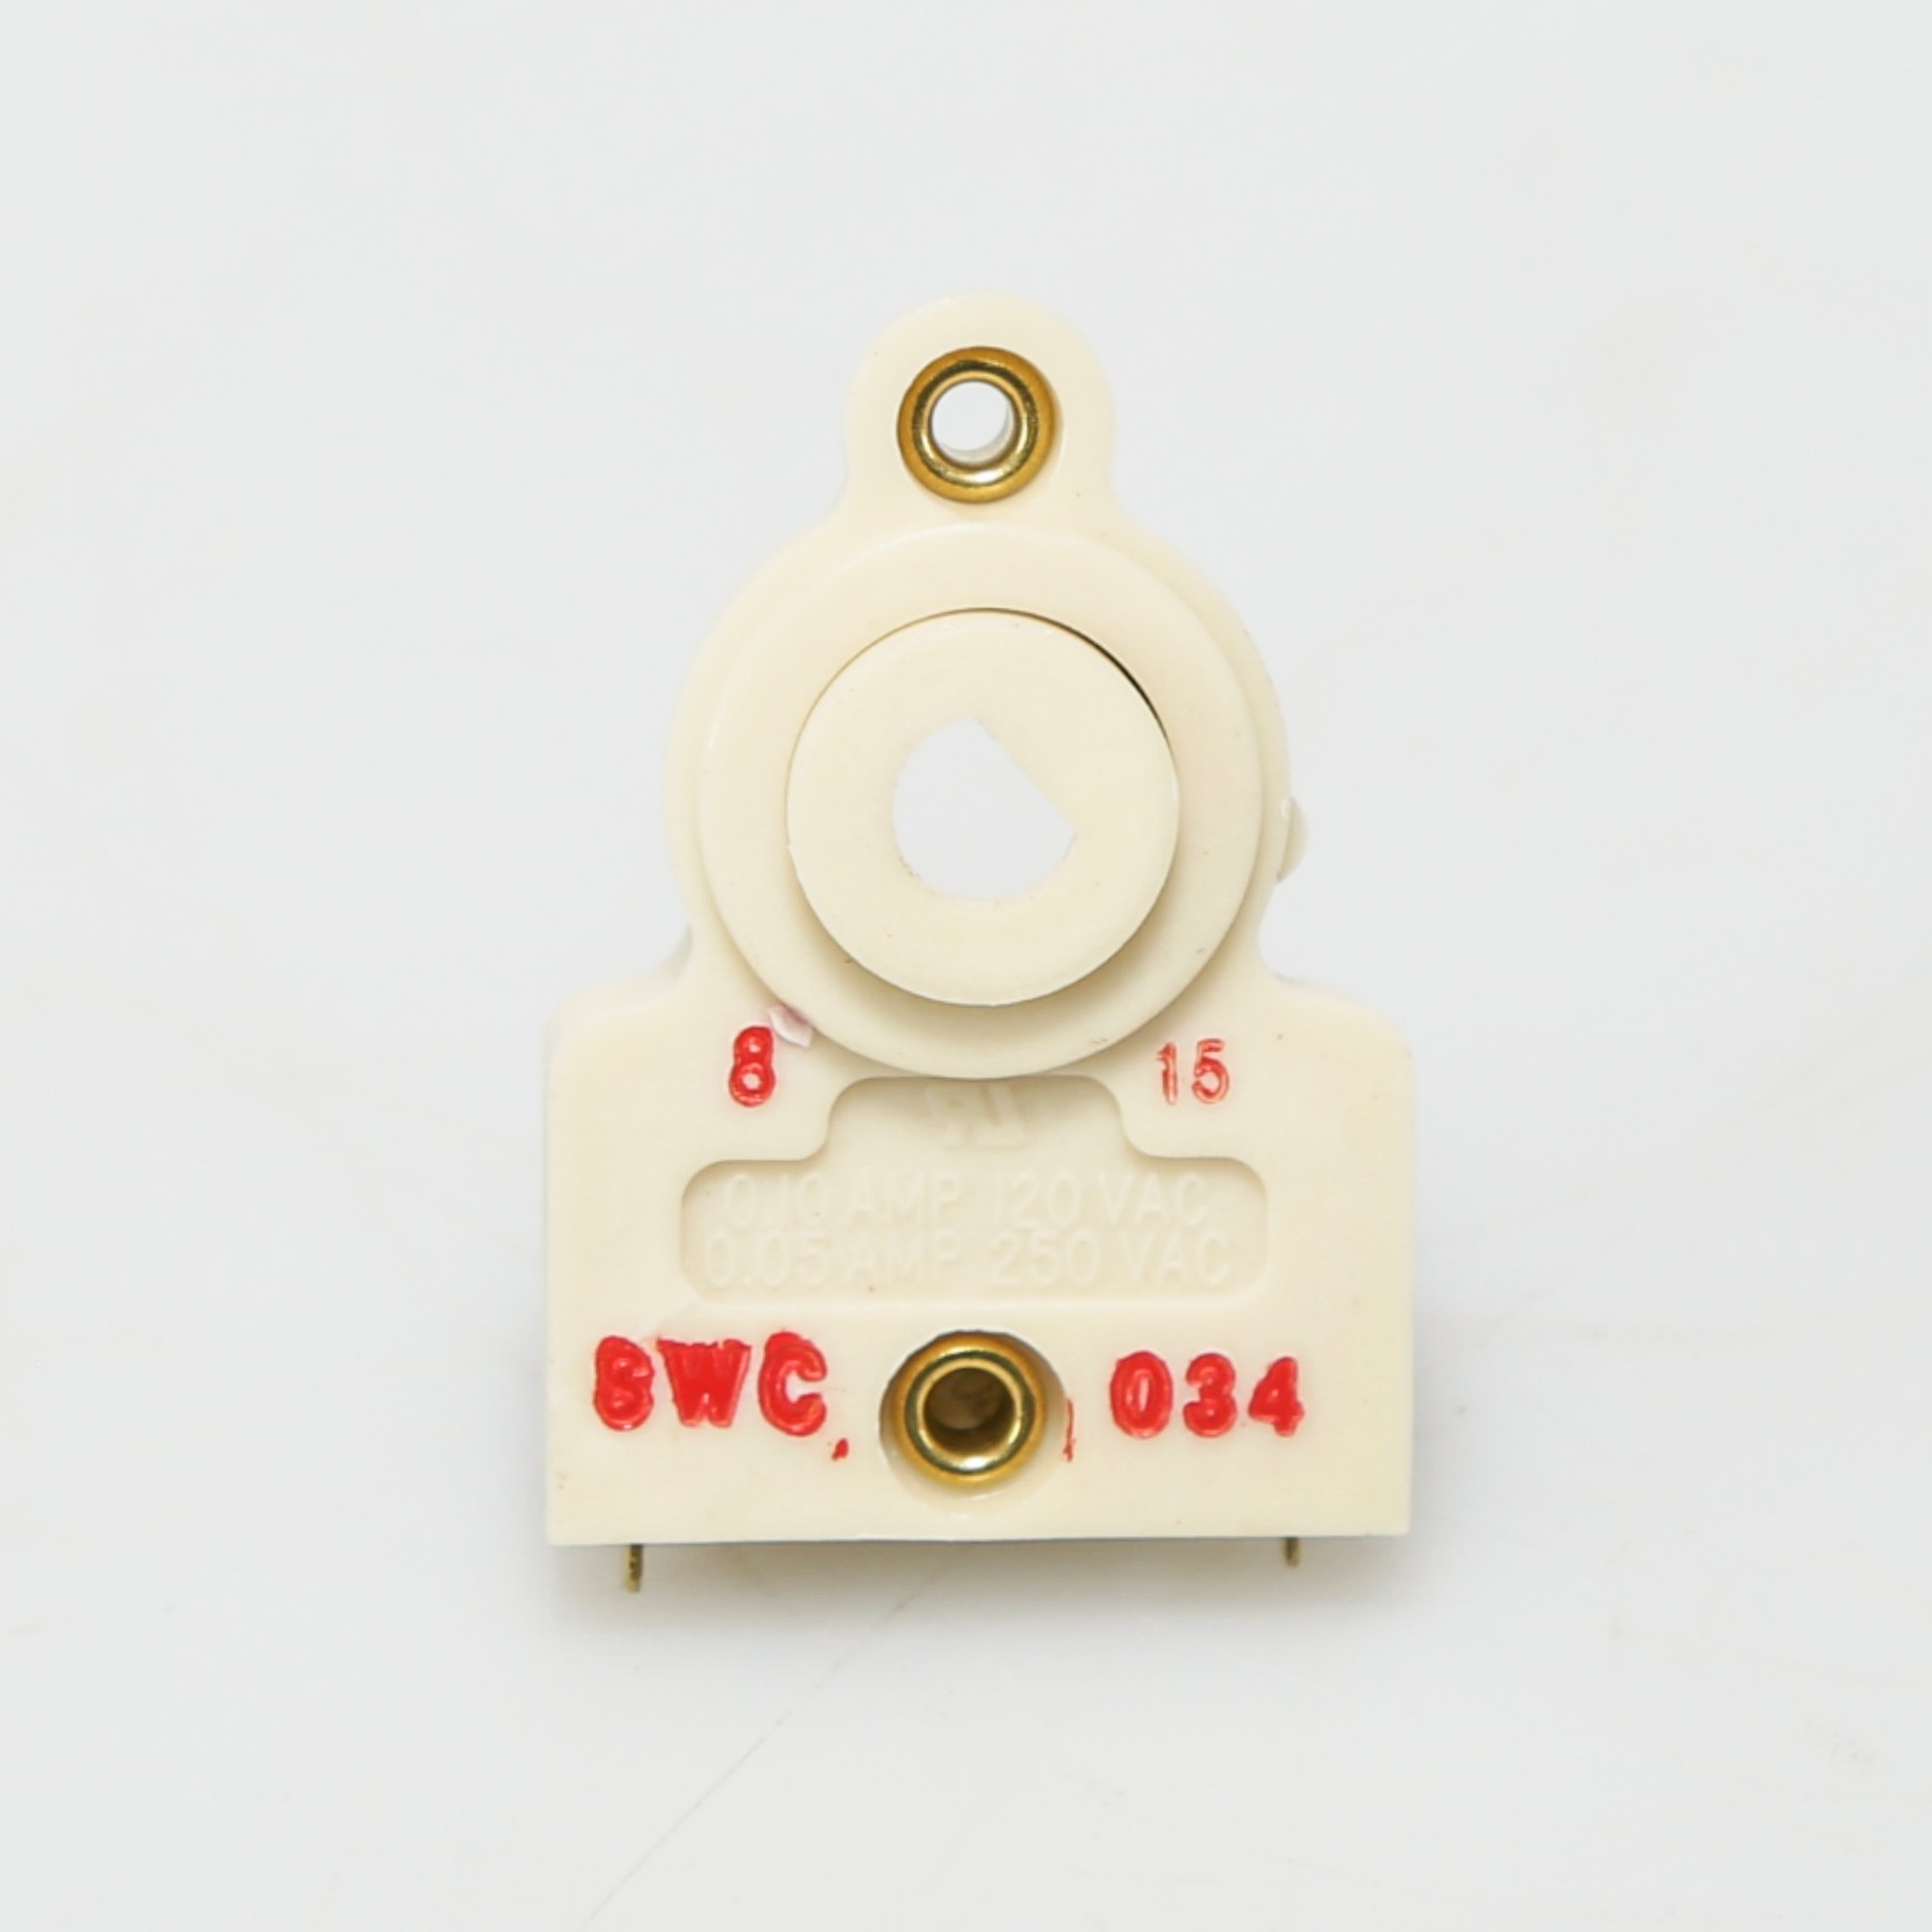 WB24T10071 Gas Valve Licon Switch for General Electric Range 